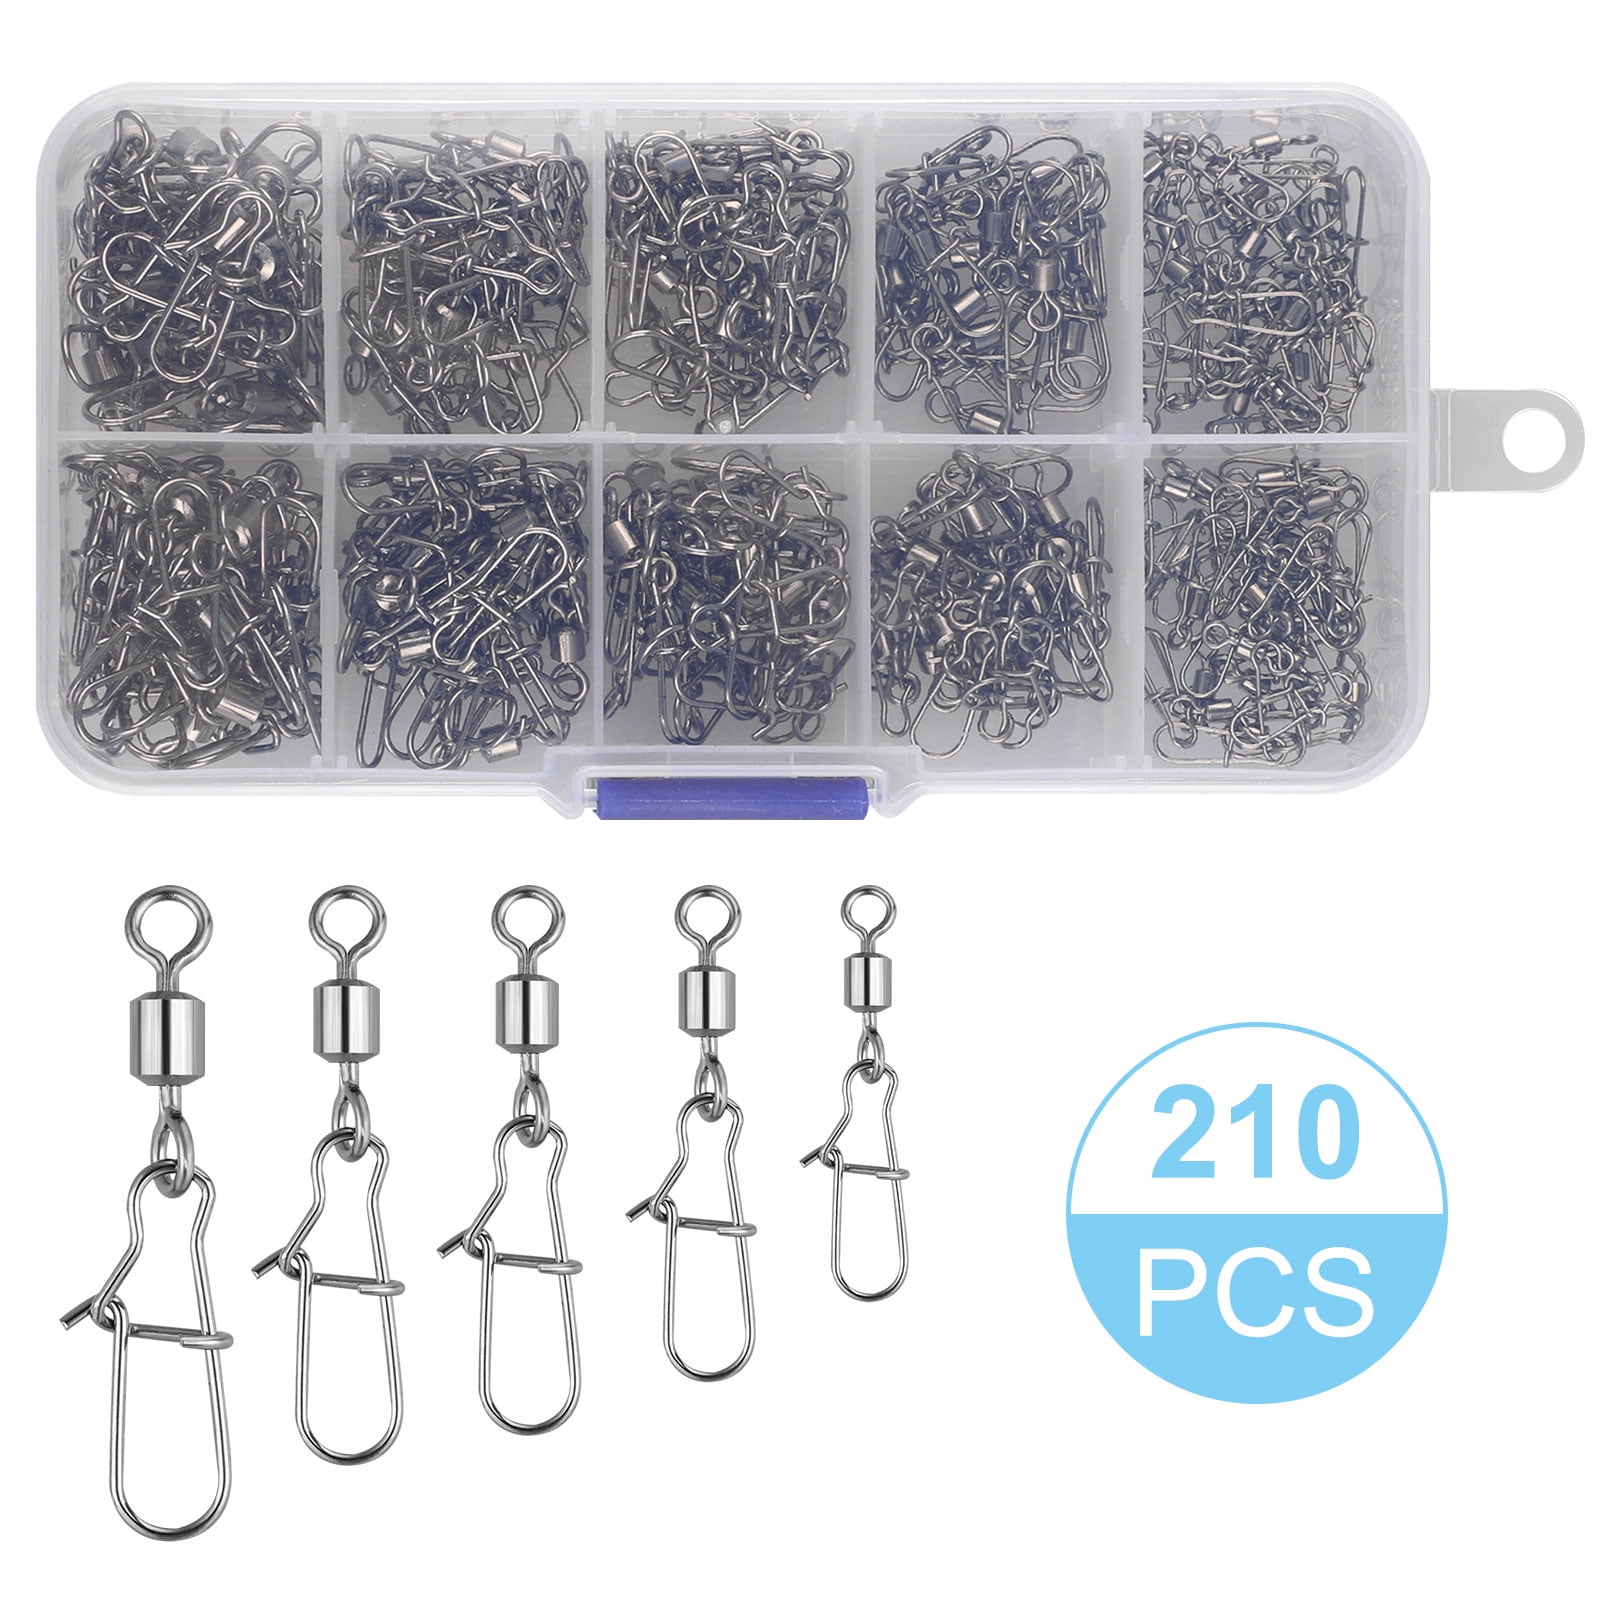 EEEkit Fishing 210pieces/Box Fishing Swivel Snap Connectors Size 2 4 5 6 8  High-Strength Fishing Rolling Swivels with Nice Snaps Fishing Tackle Kit